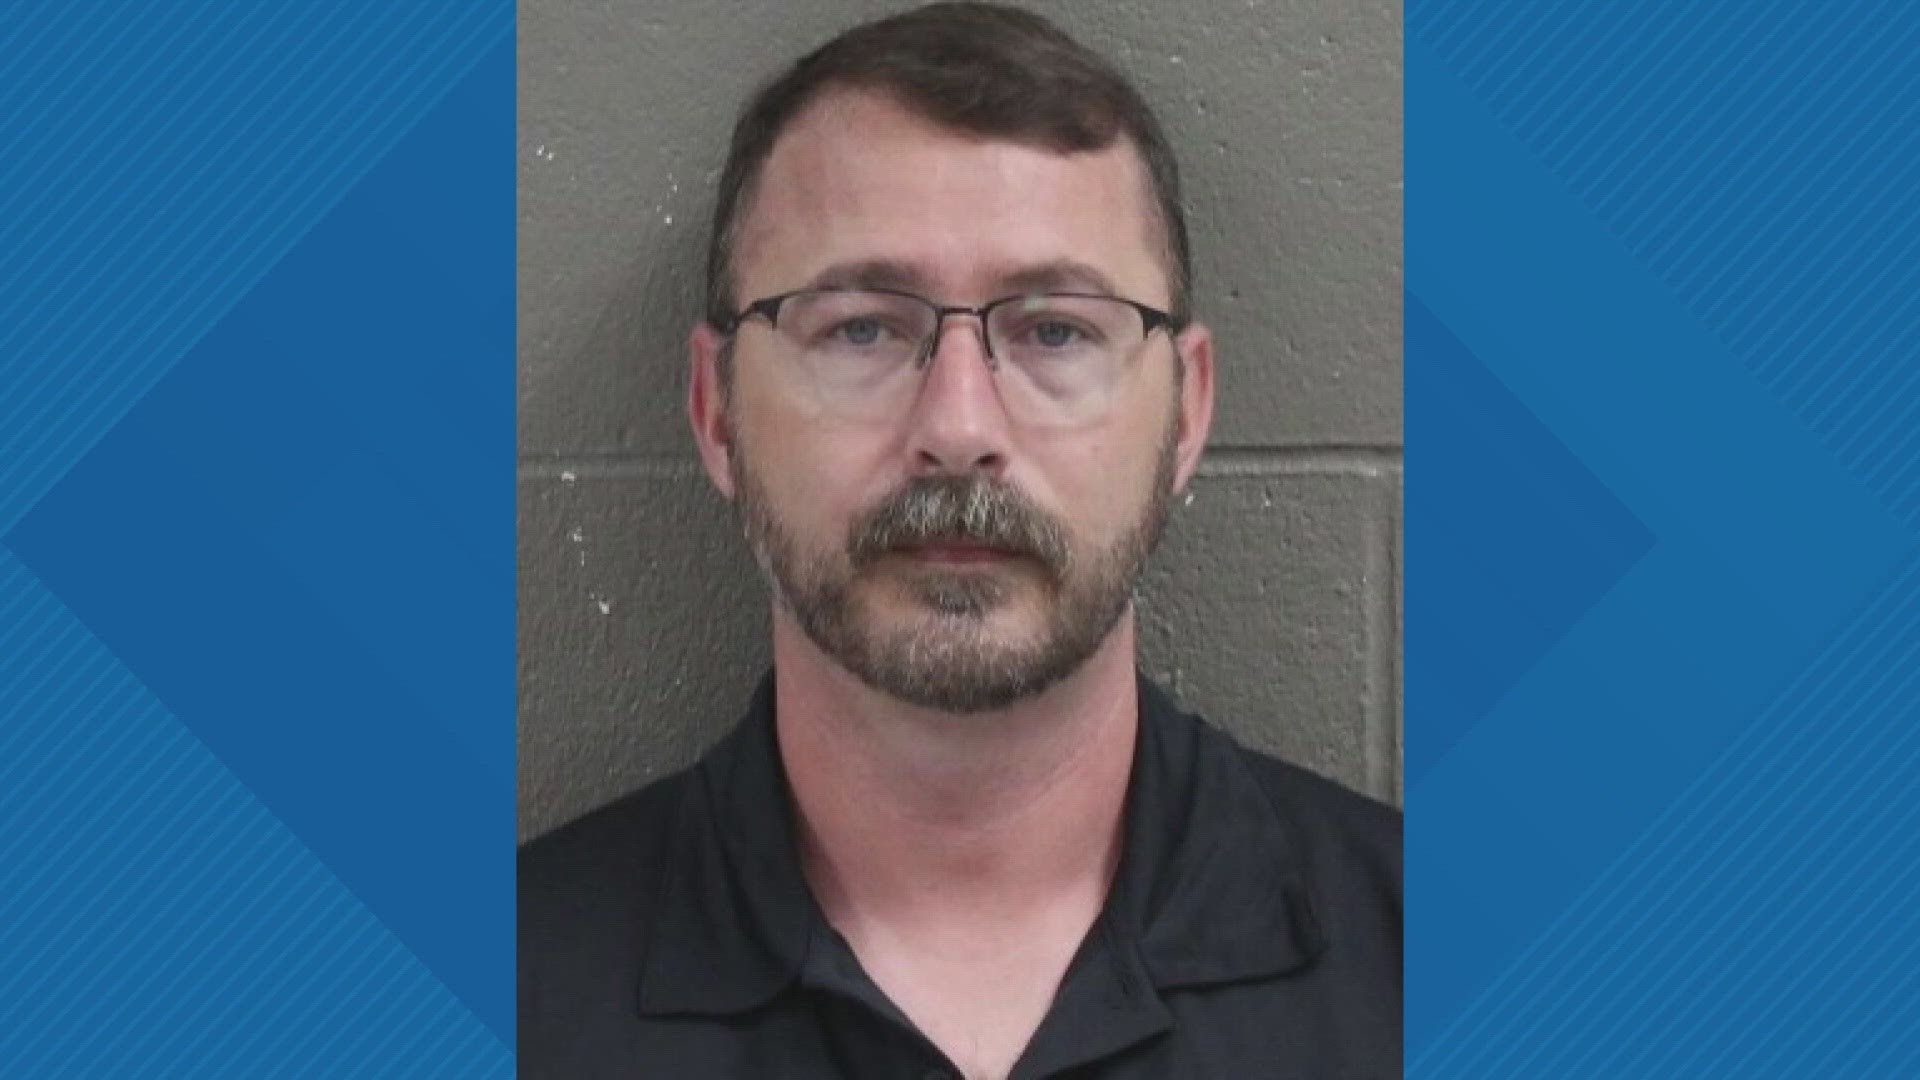 MO deputy charged for possession of child sex abuse materials ksdk pic